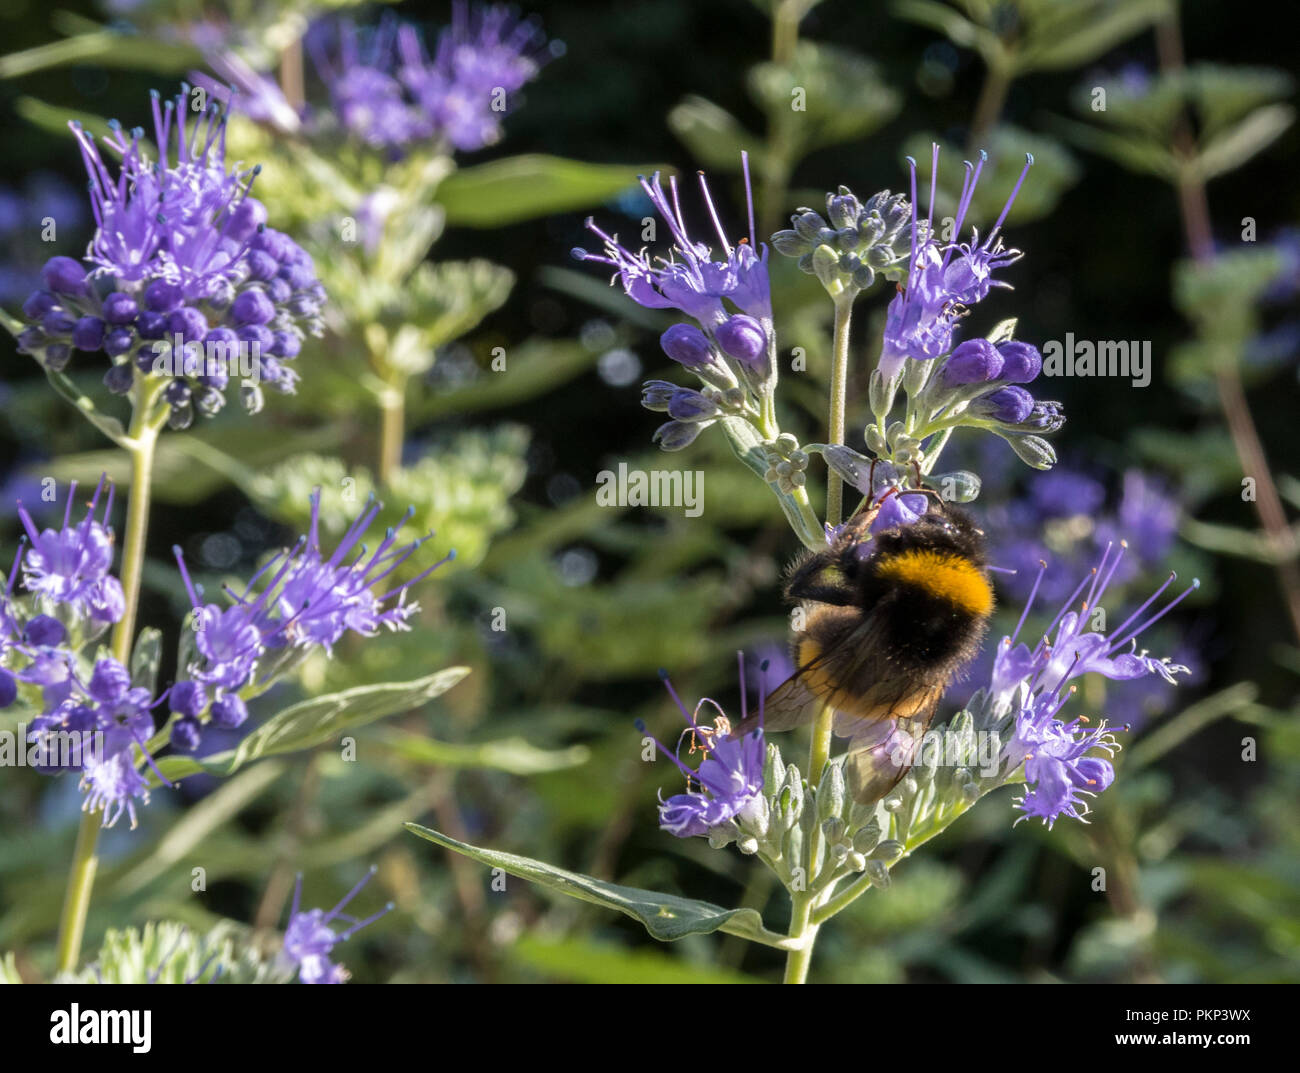 Bees are attracted to Caryopteris × clandonensis Heavenly Blue, a blue flowering shrub in September. Stock Photo